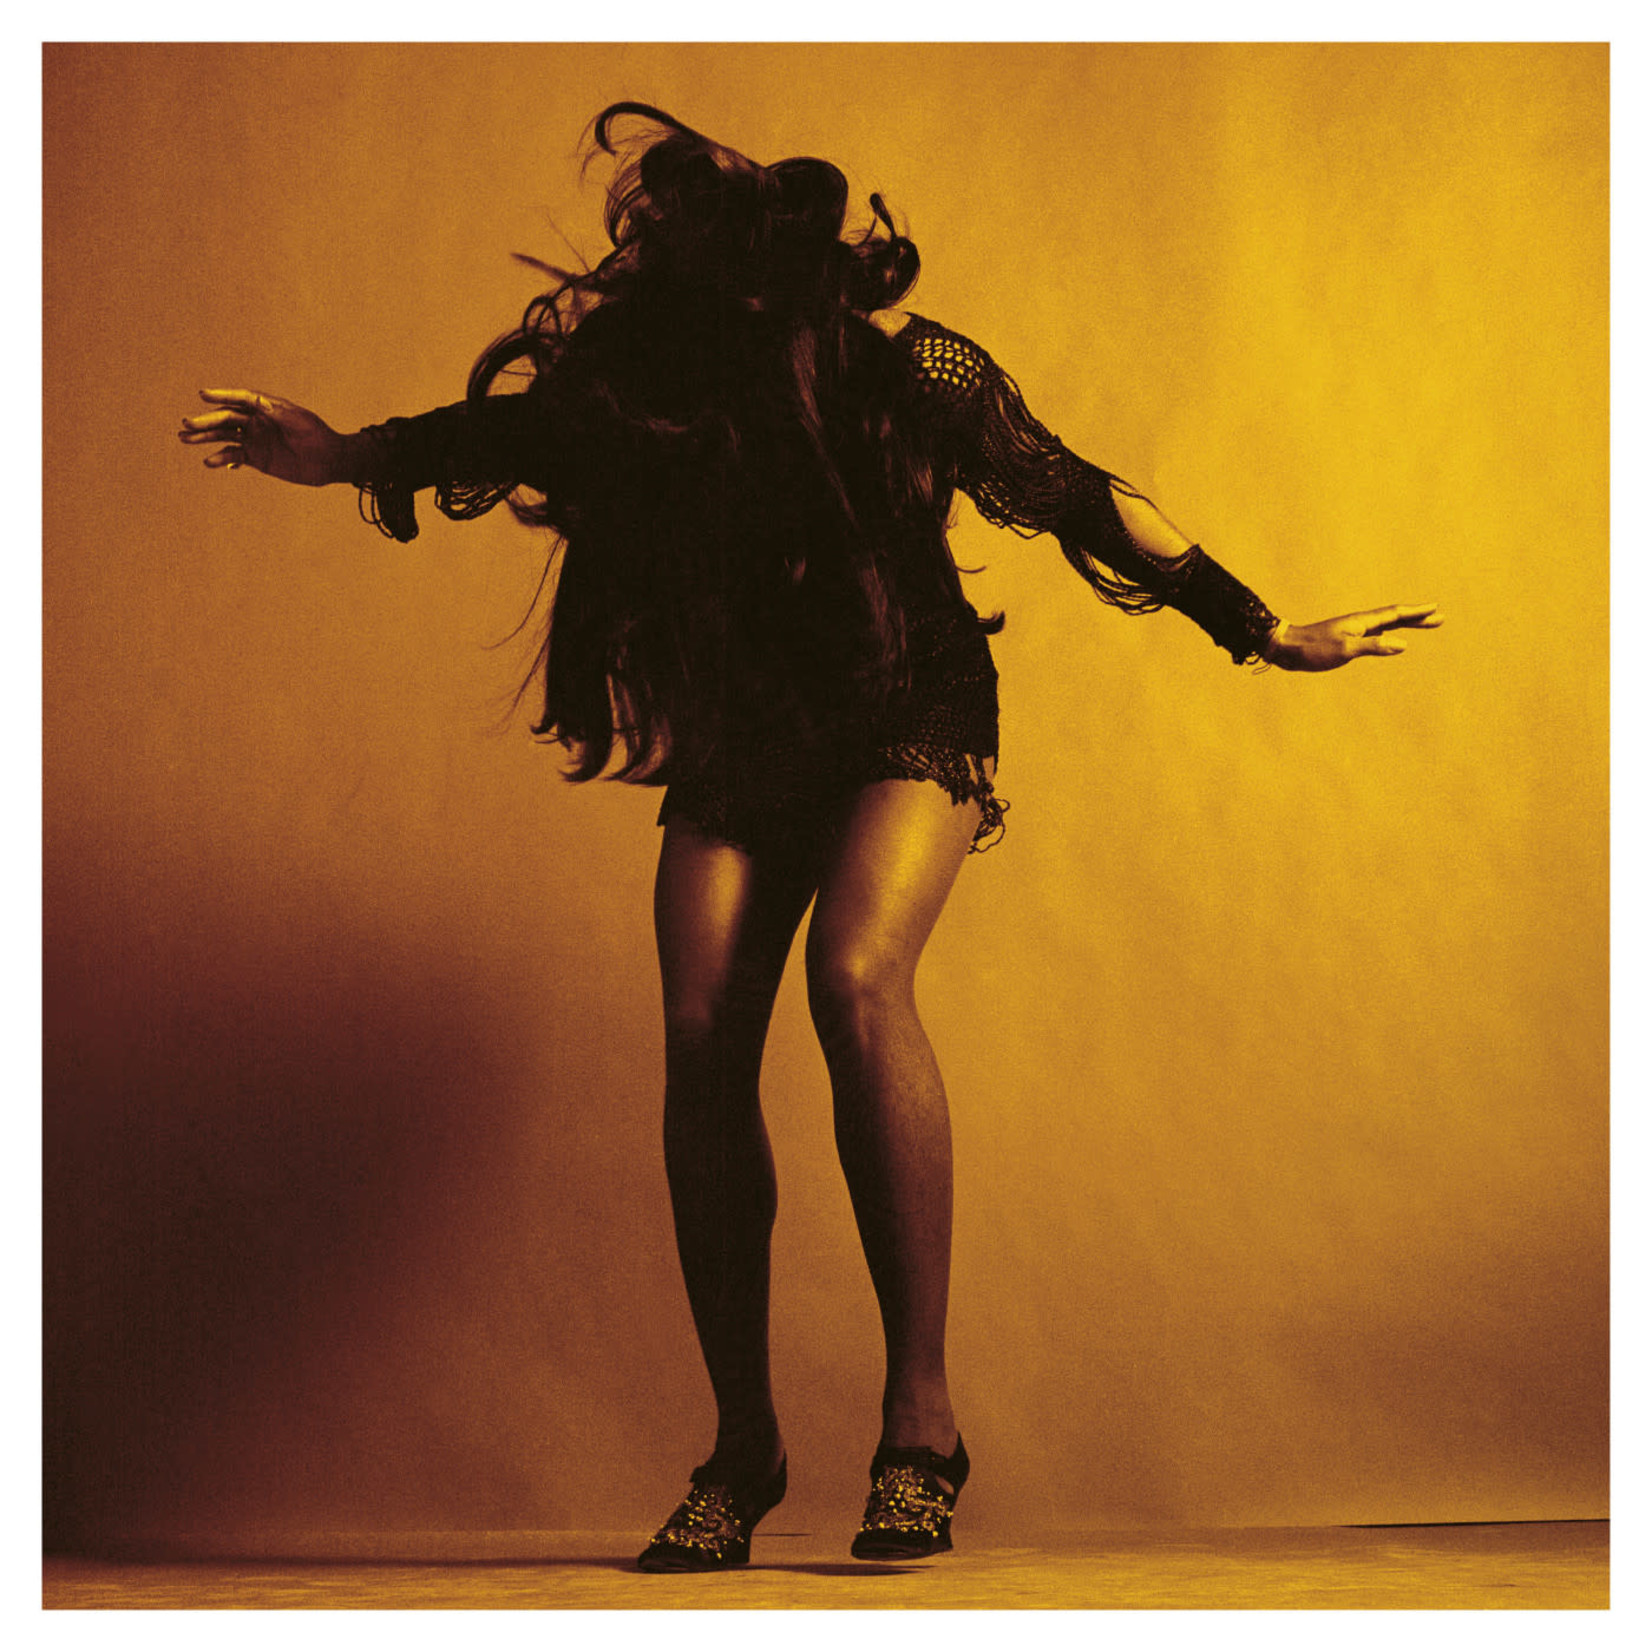 [New] Last Shadow Puppets, The: Everything You've Come To Expect [DOMINO]